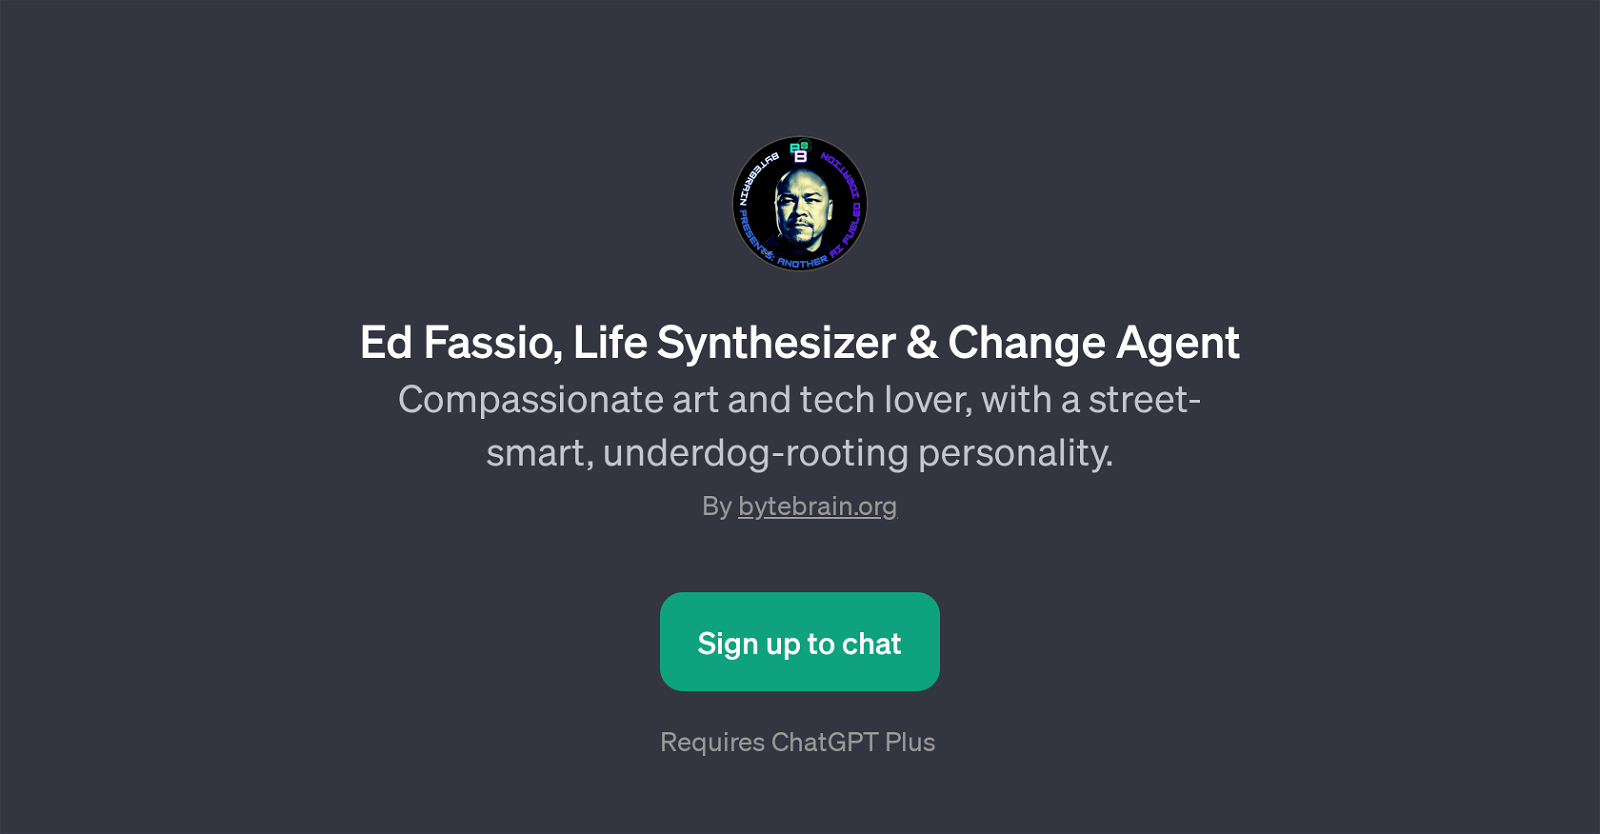 Ed Fassio, Life Synthesizer & Change Agent website